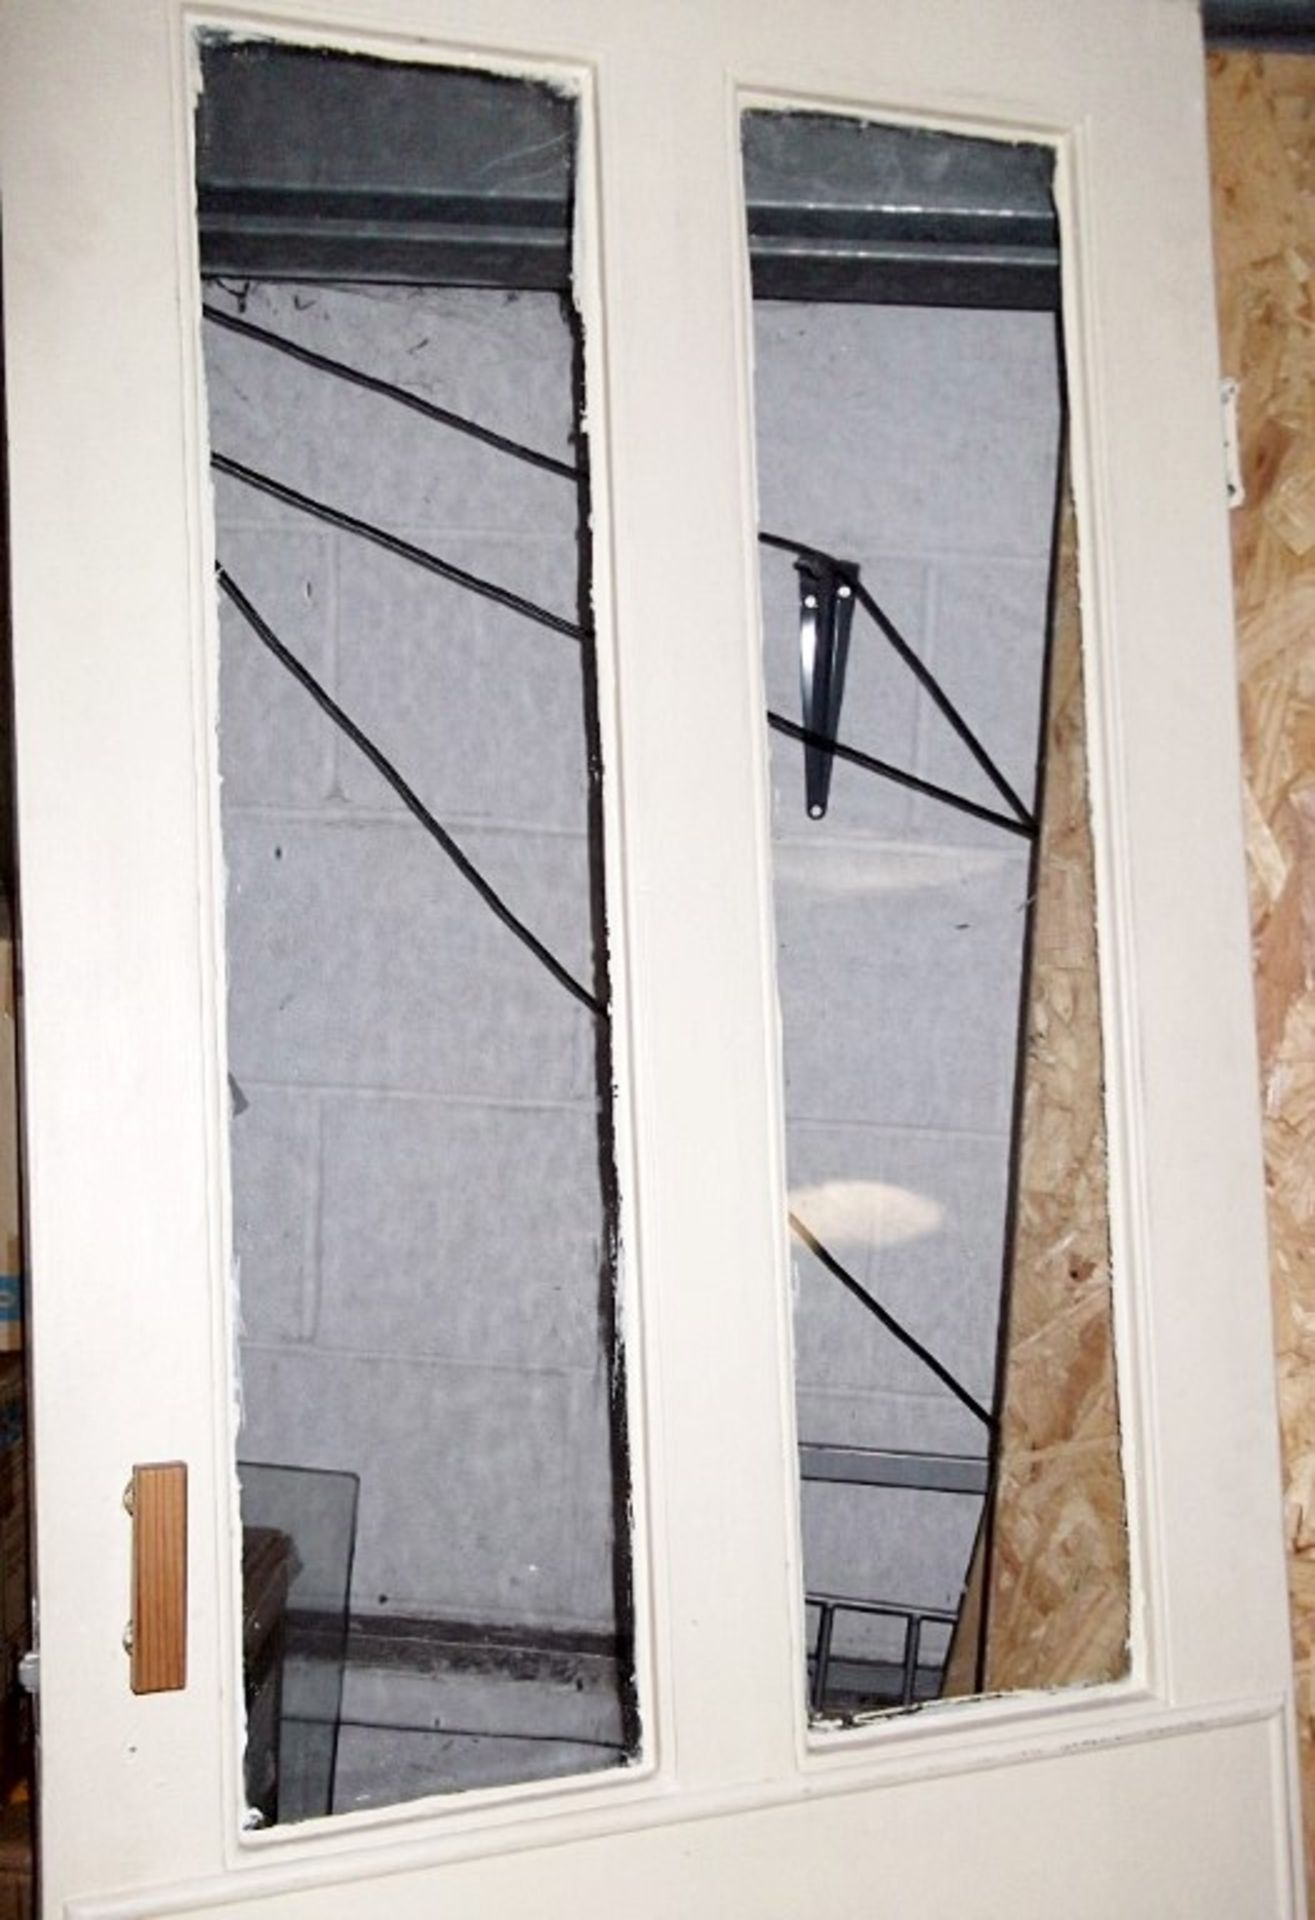 1 x Door Featuring 2 Glass Panels - Pre-owned In Useable Condition - Dimensions: H197.5 x W68cm - - Image 2 of 5